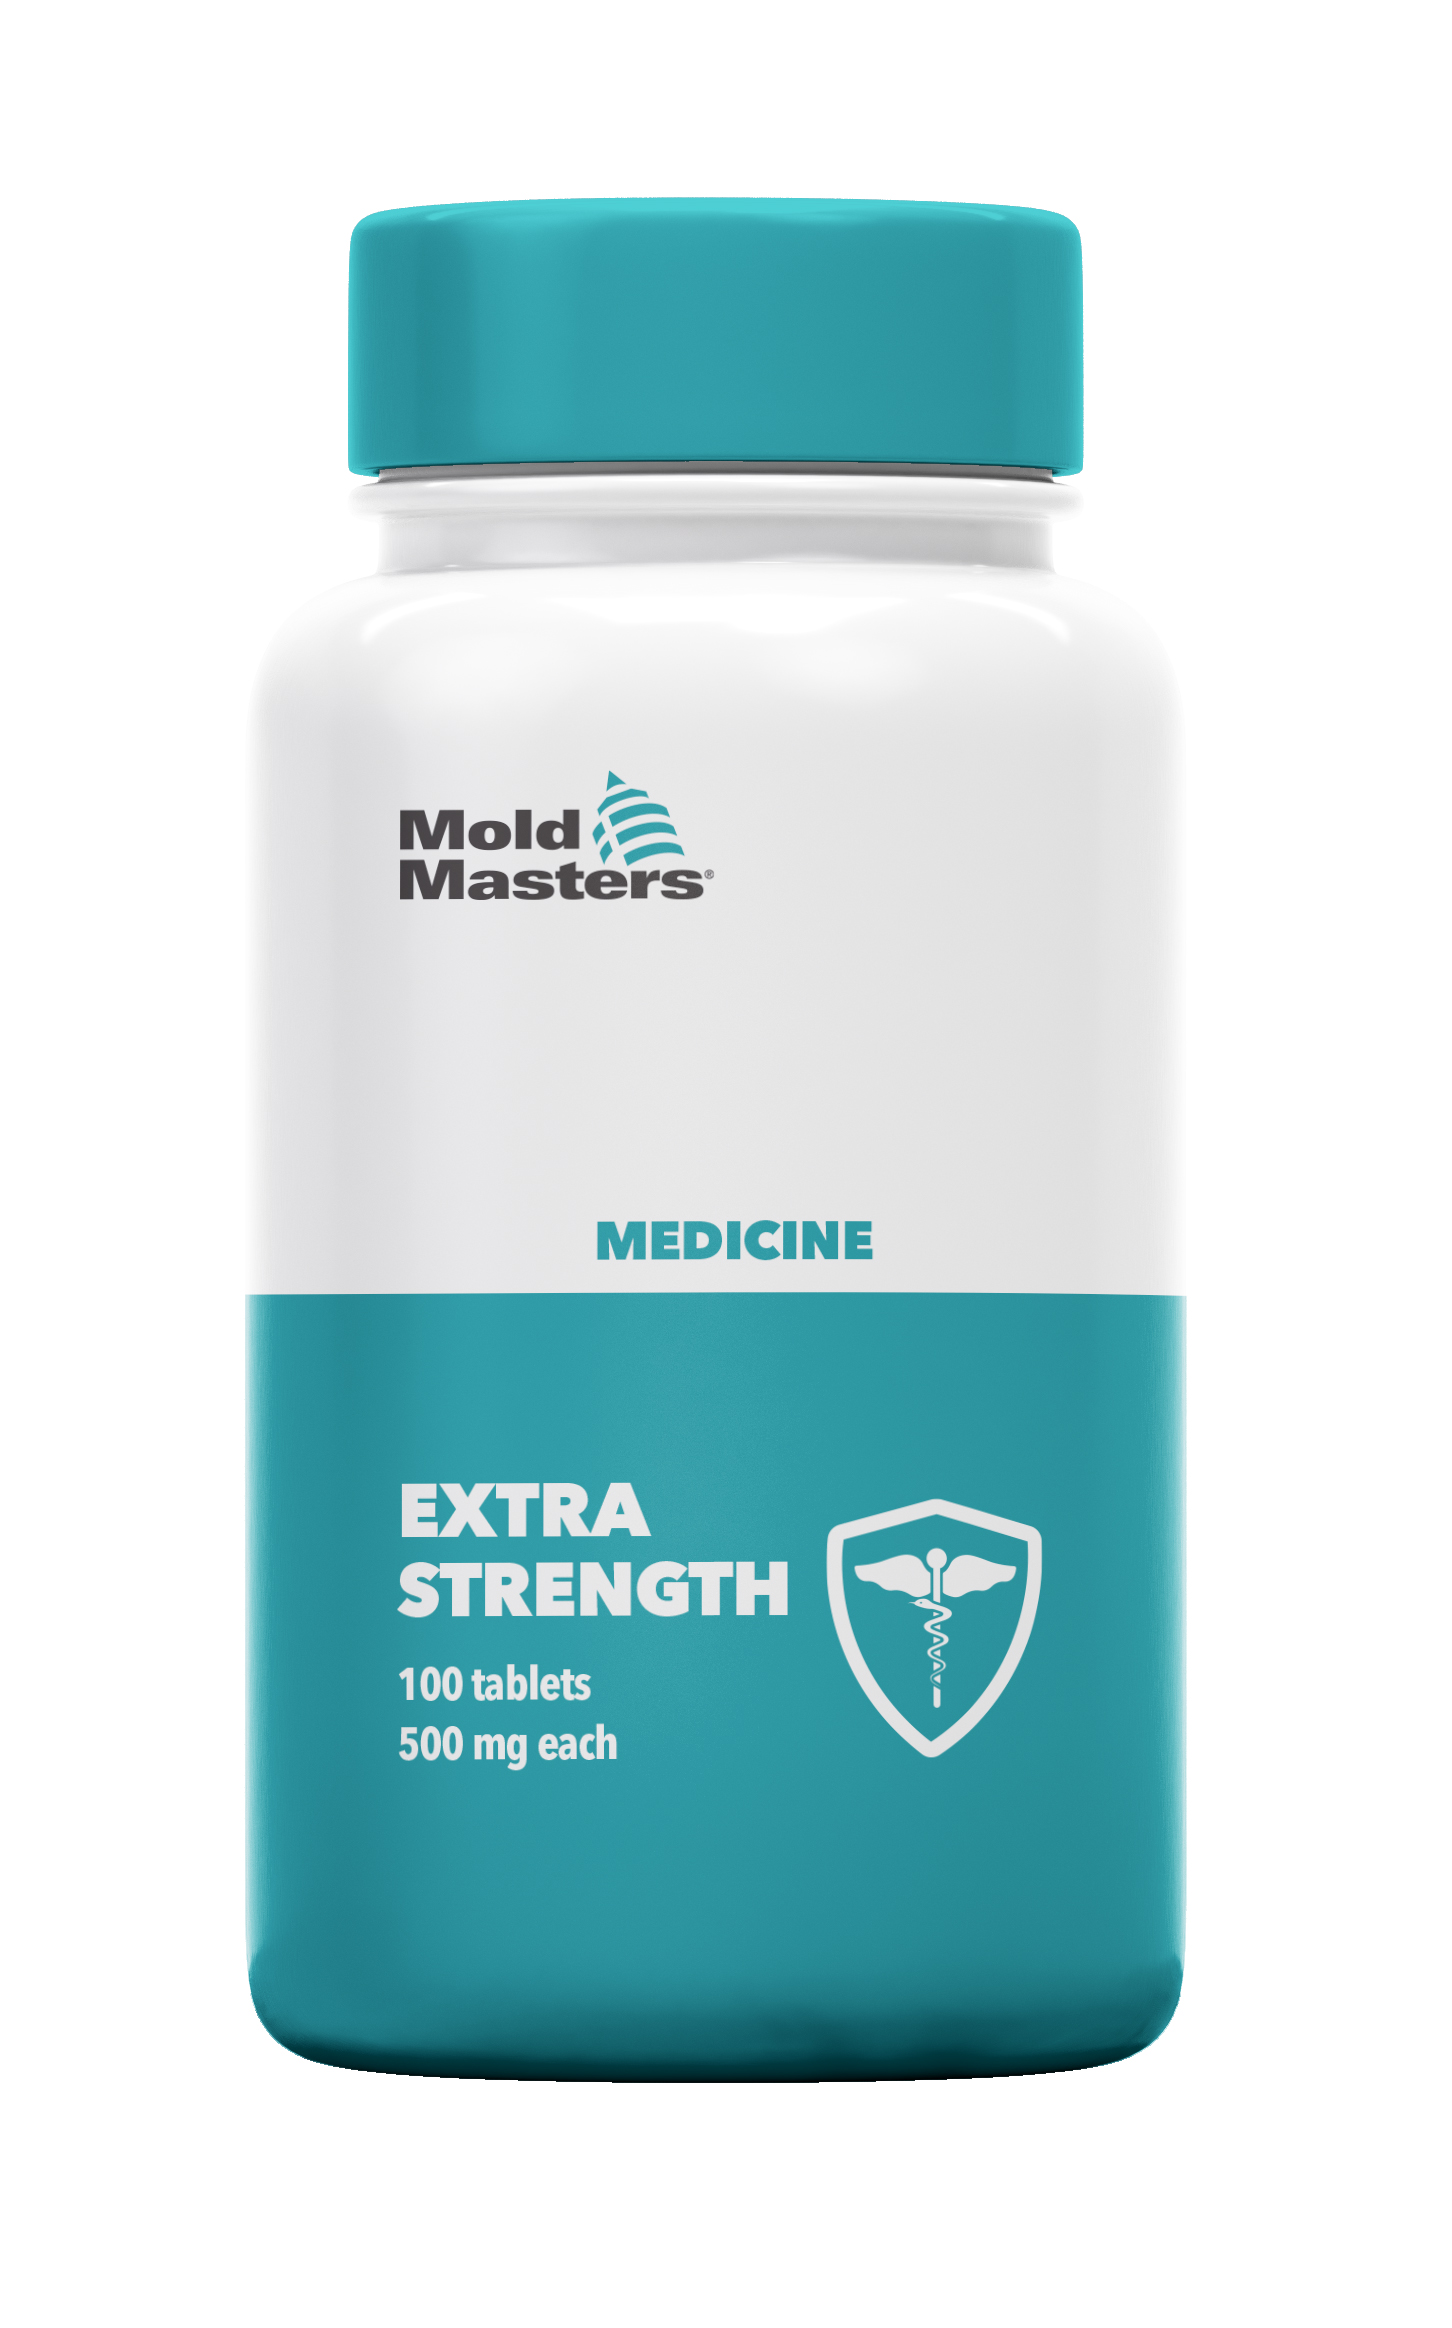 Mold-Masters Co-injected Pill Bottle